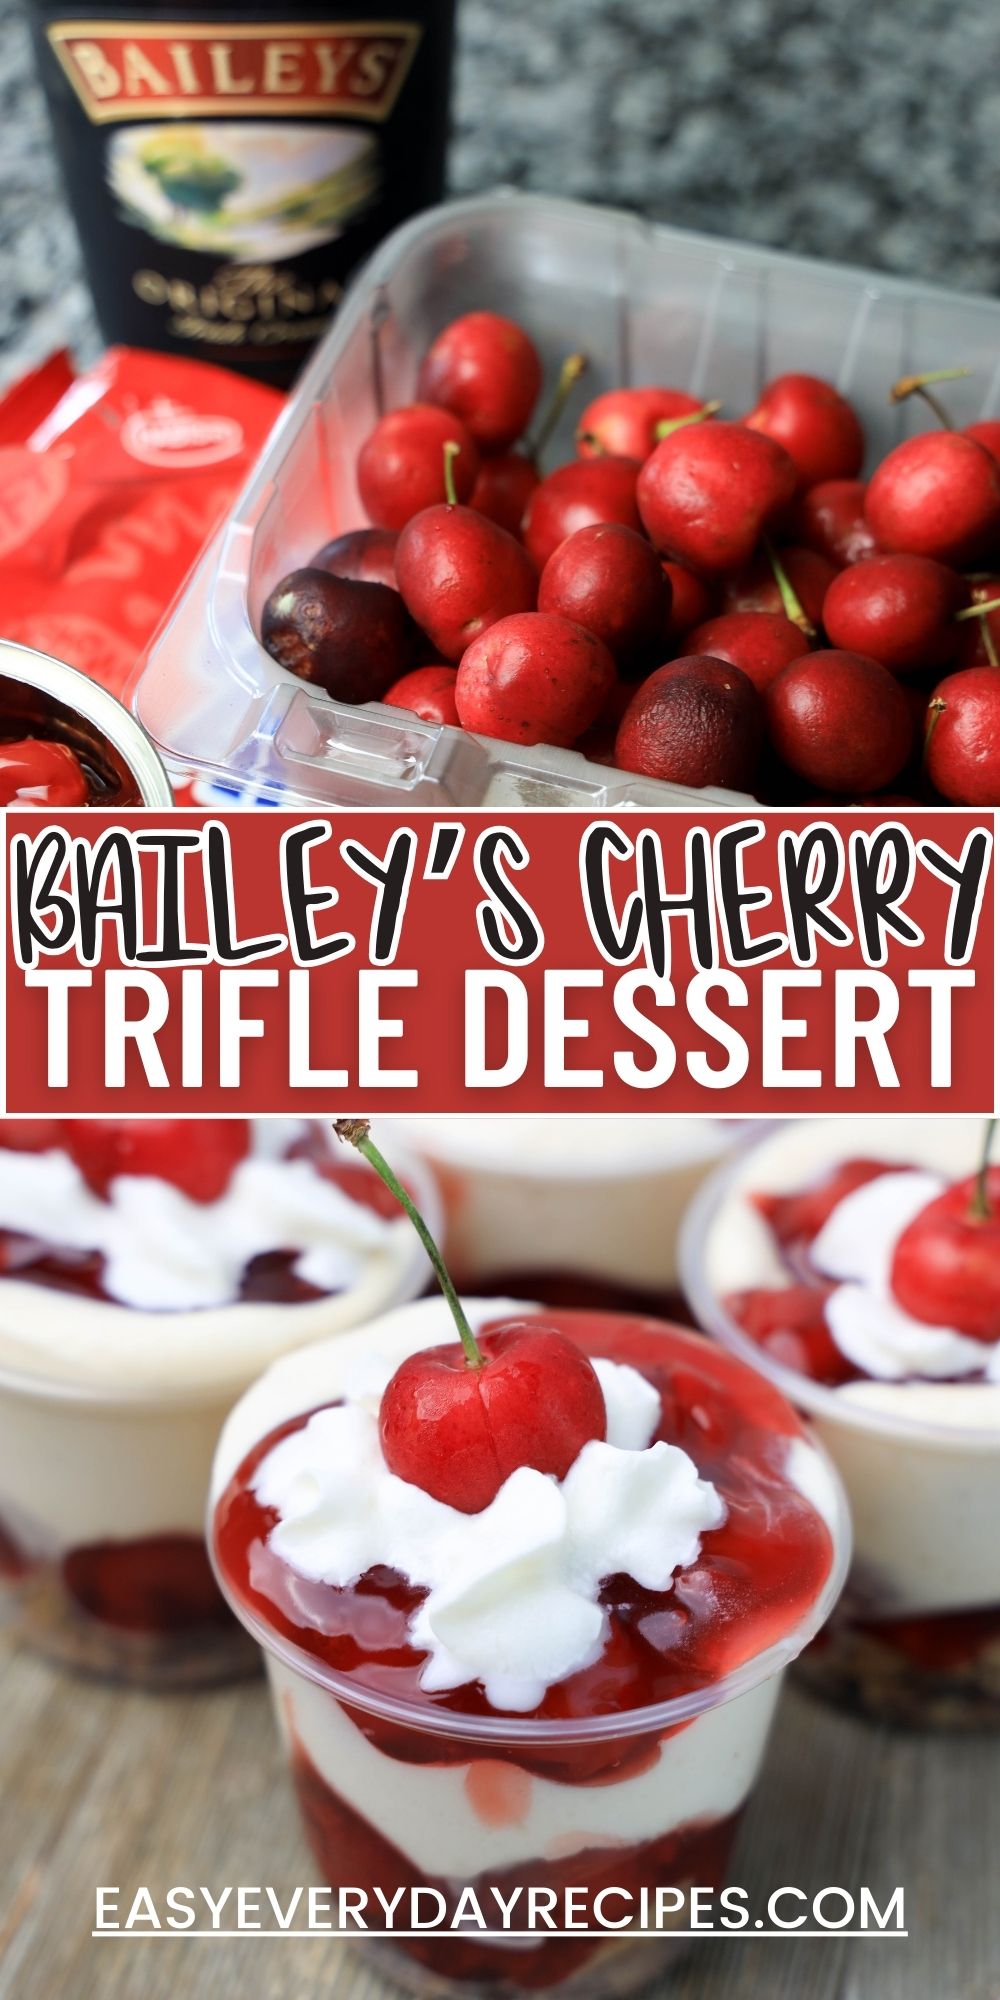 A group of desserts with cherries in a plastic container.